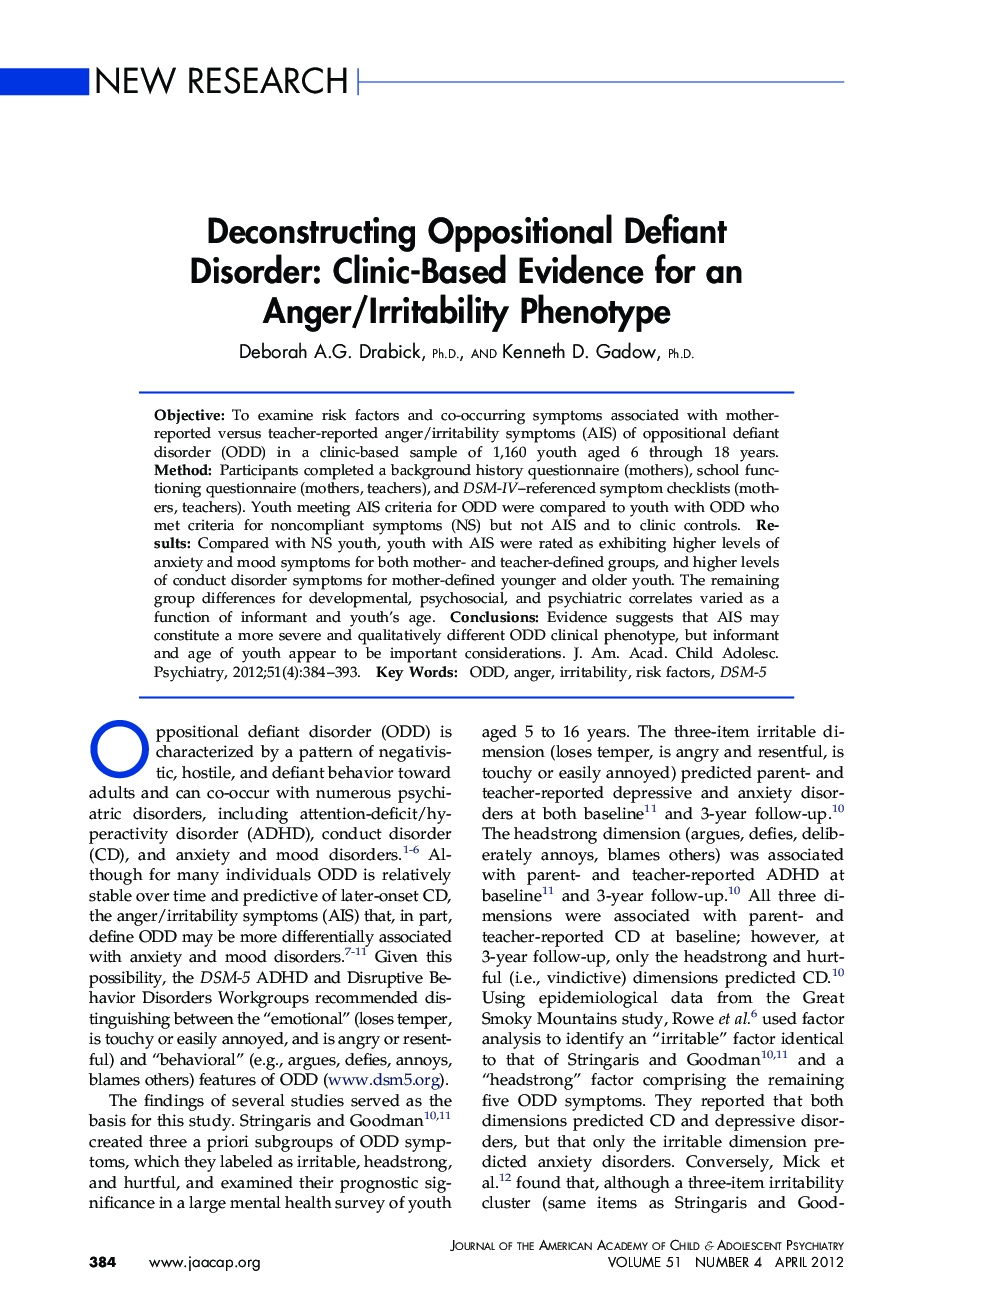 Deconstructing Oppositional Defiant Disorder: Clinic-Based Evidence for an Anger/Irritability Phenotype 